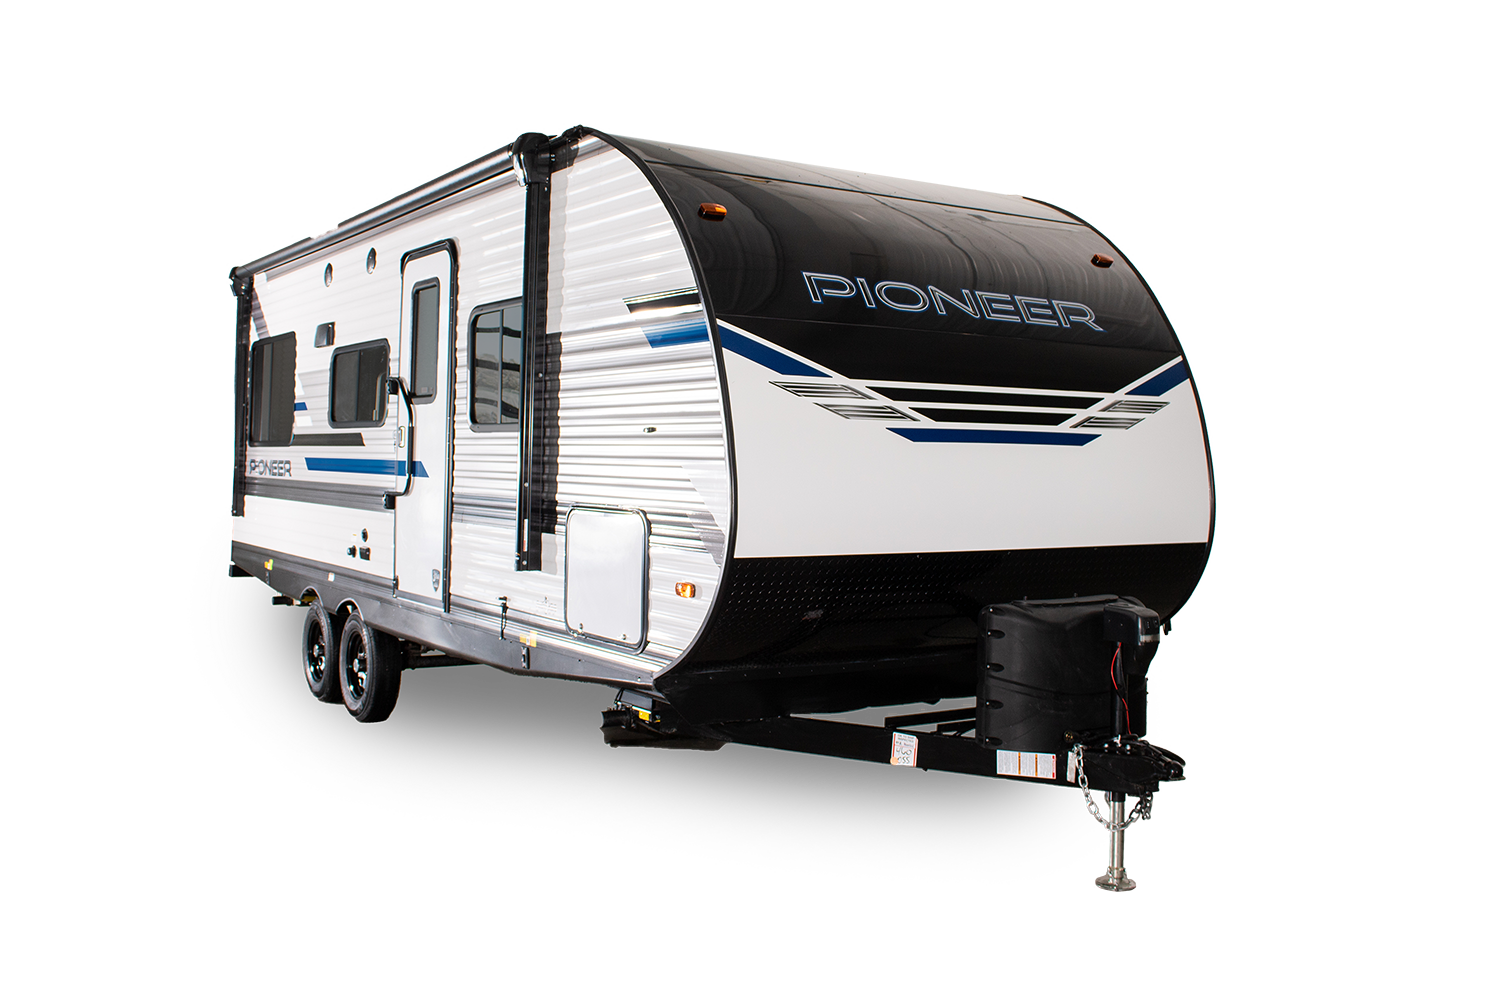 Exterior shot of a Heartland Pioneer travel trailer against a blank background